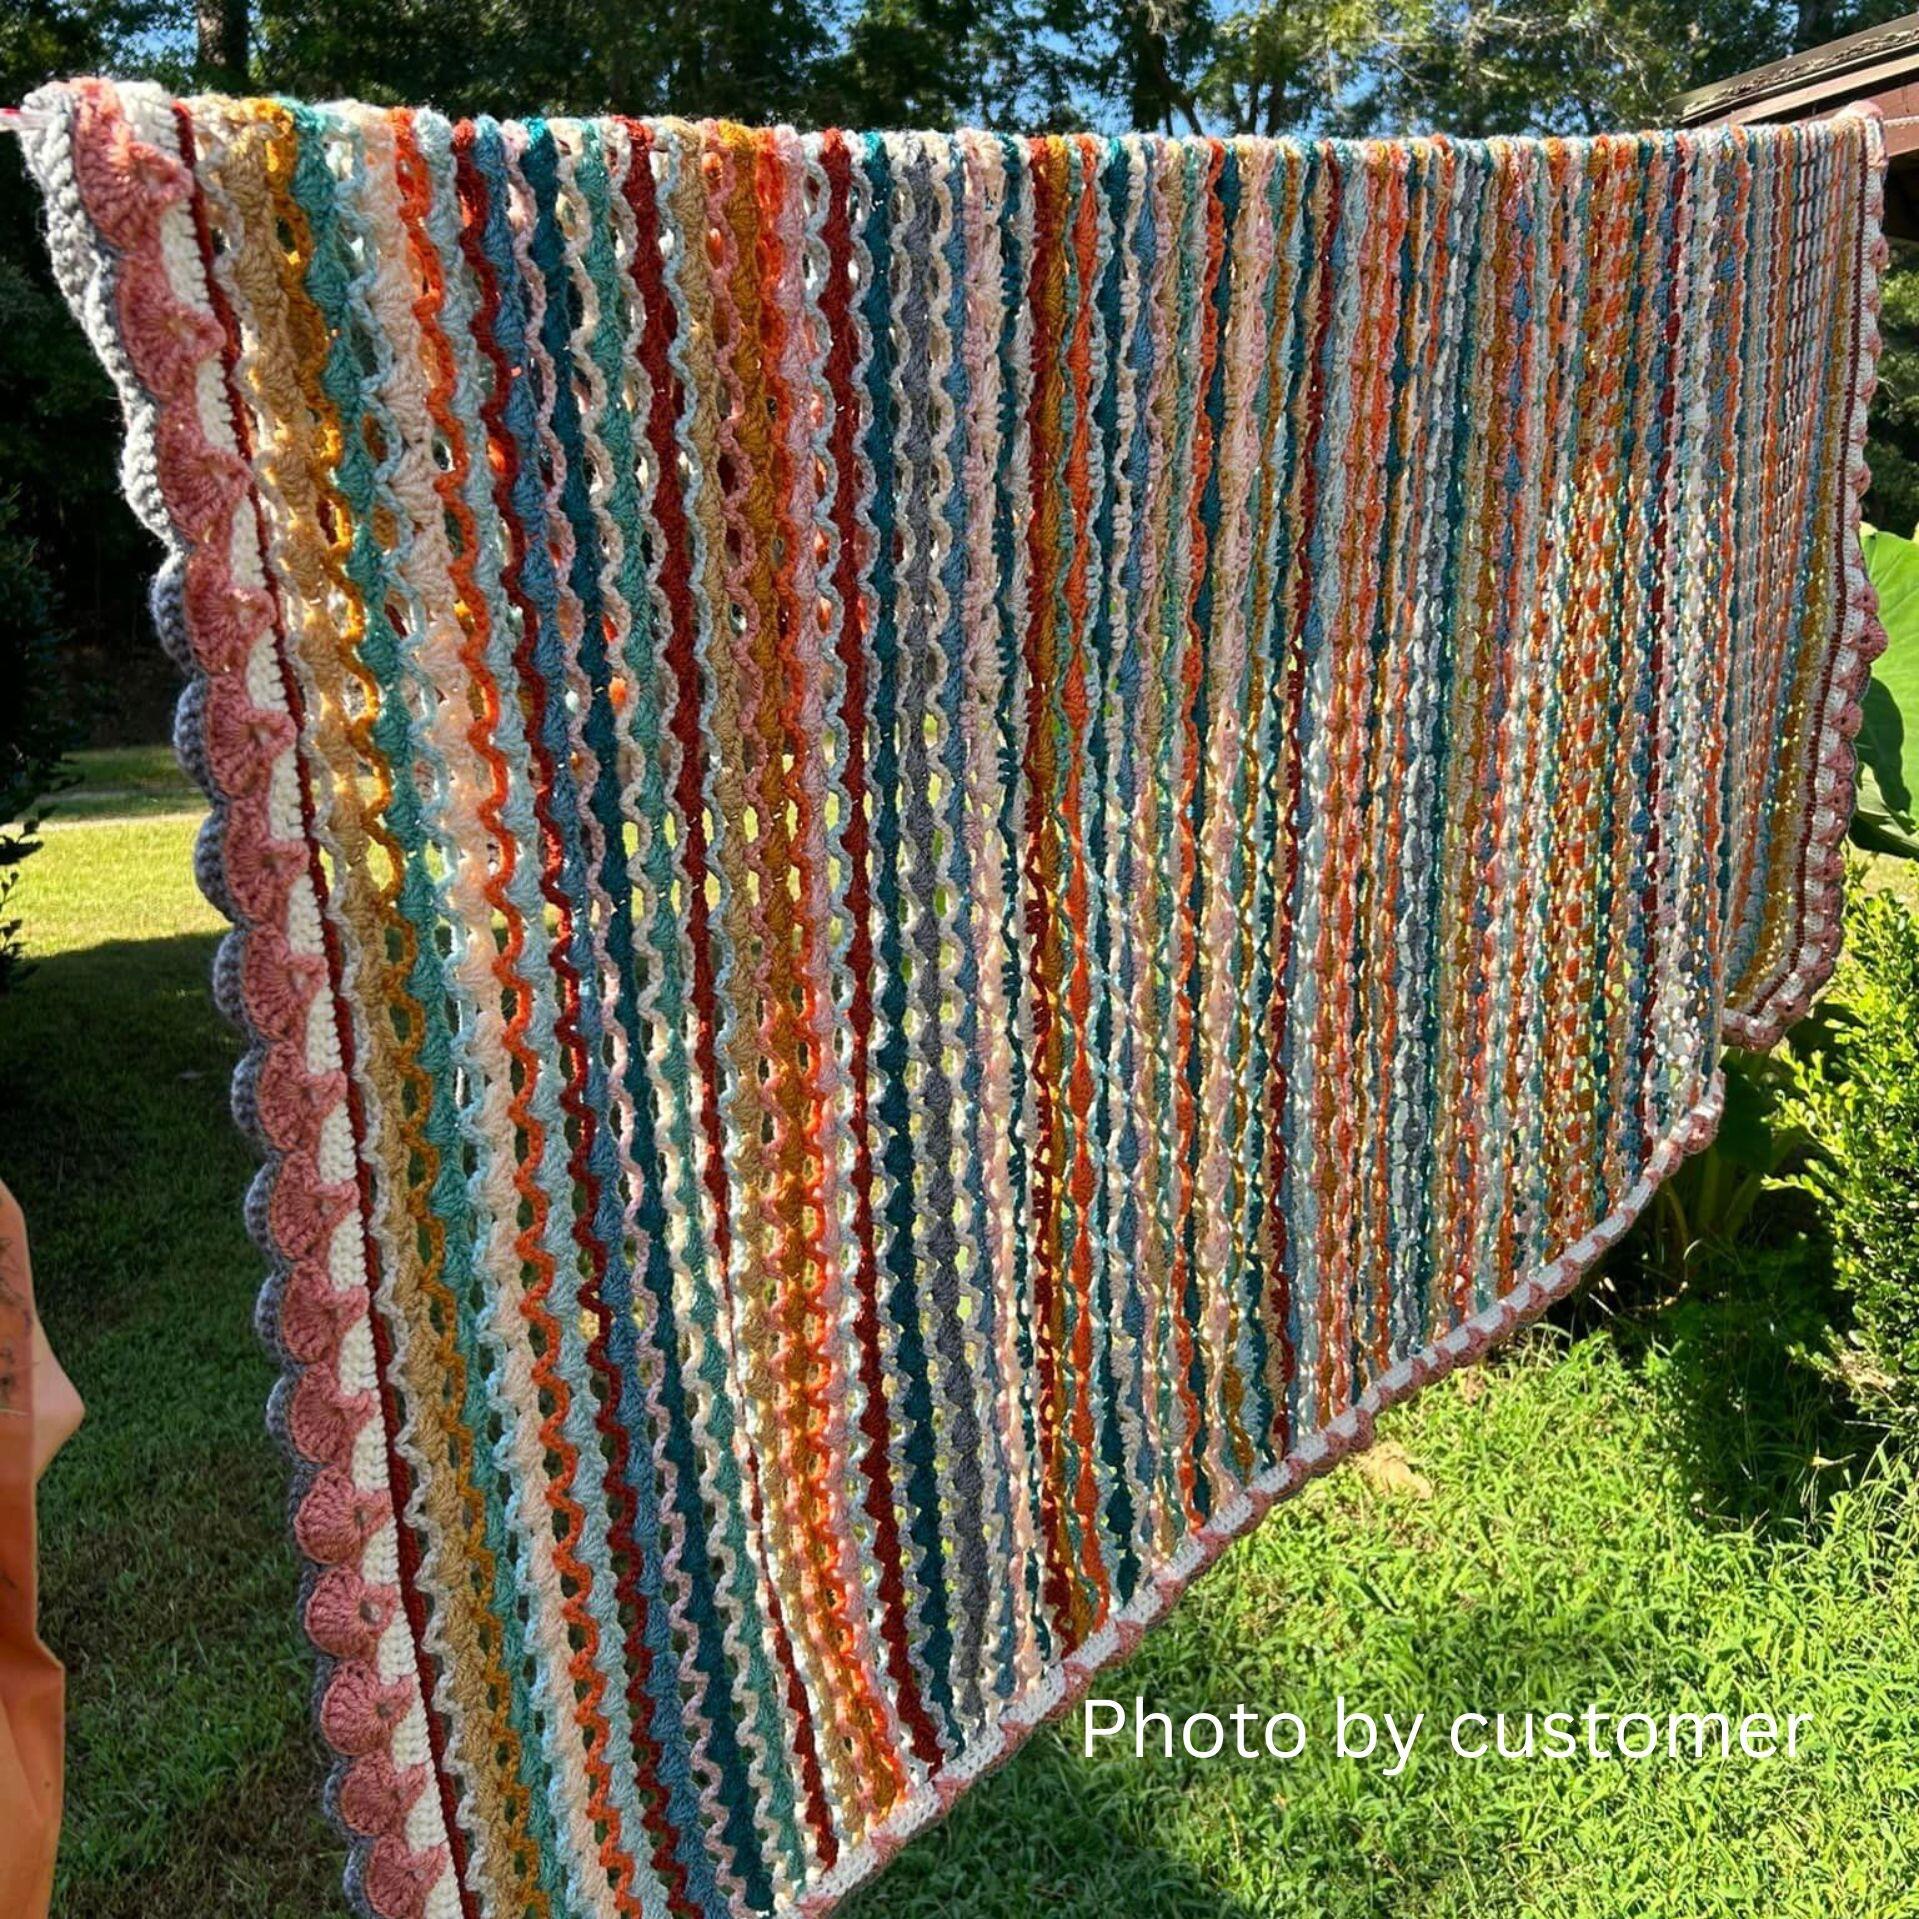 Jewels of the Nile Blanket photo taken by customer